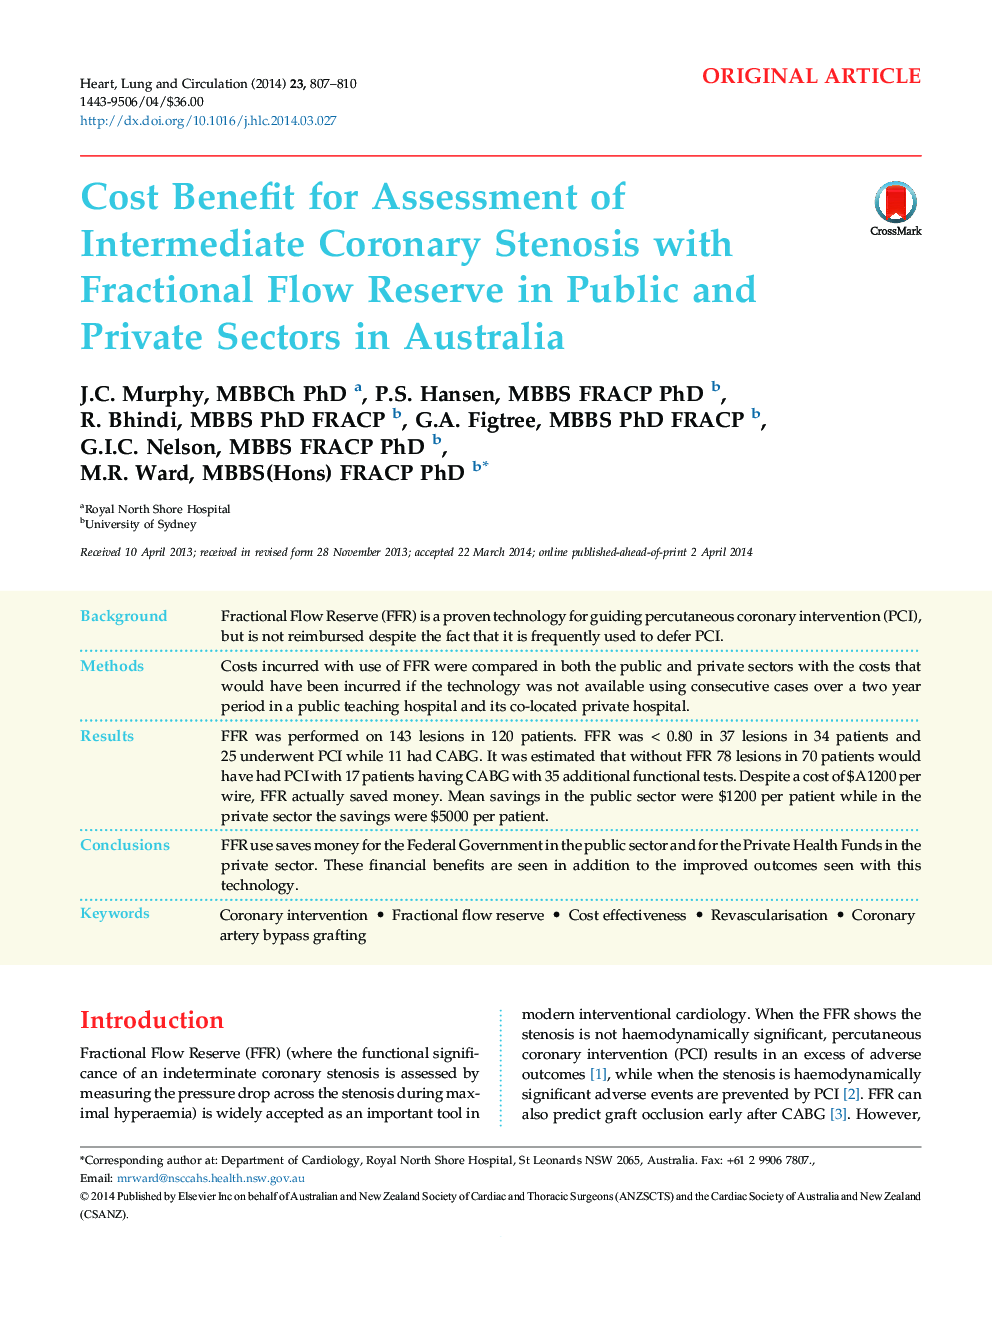 Cost Benefit for Assessment of Intermediate Coronary Stenosis with Fractional Flow Reserve in Public and Private Sectors in Australia